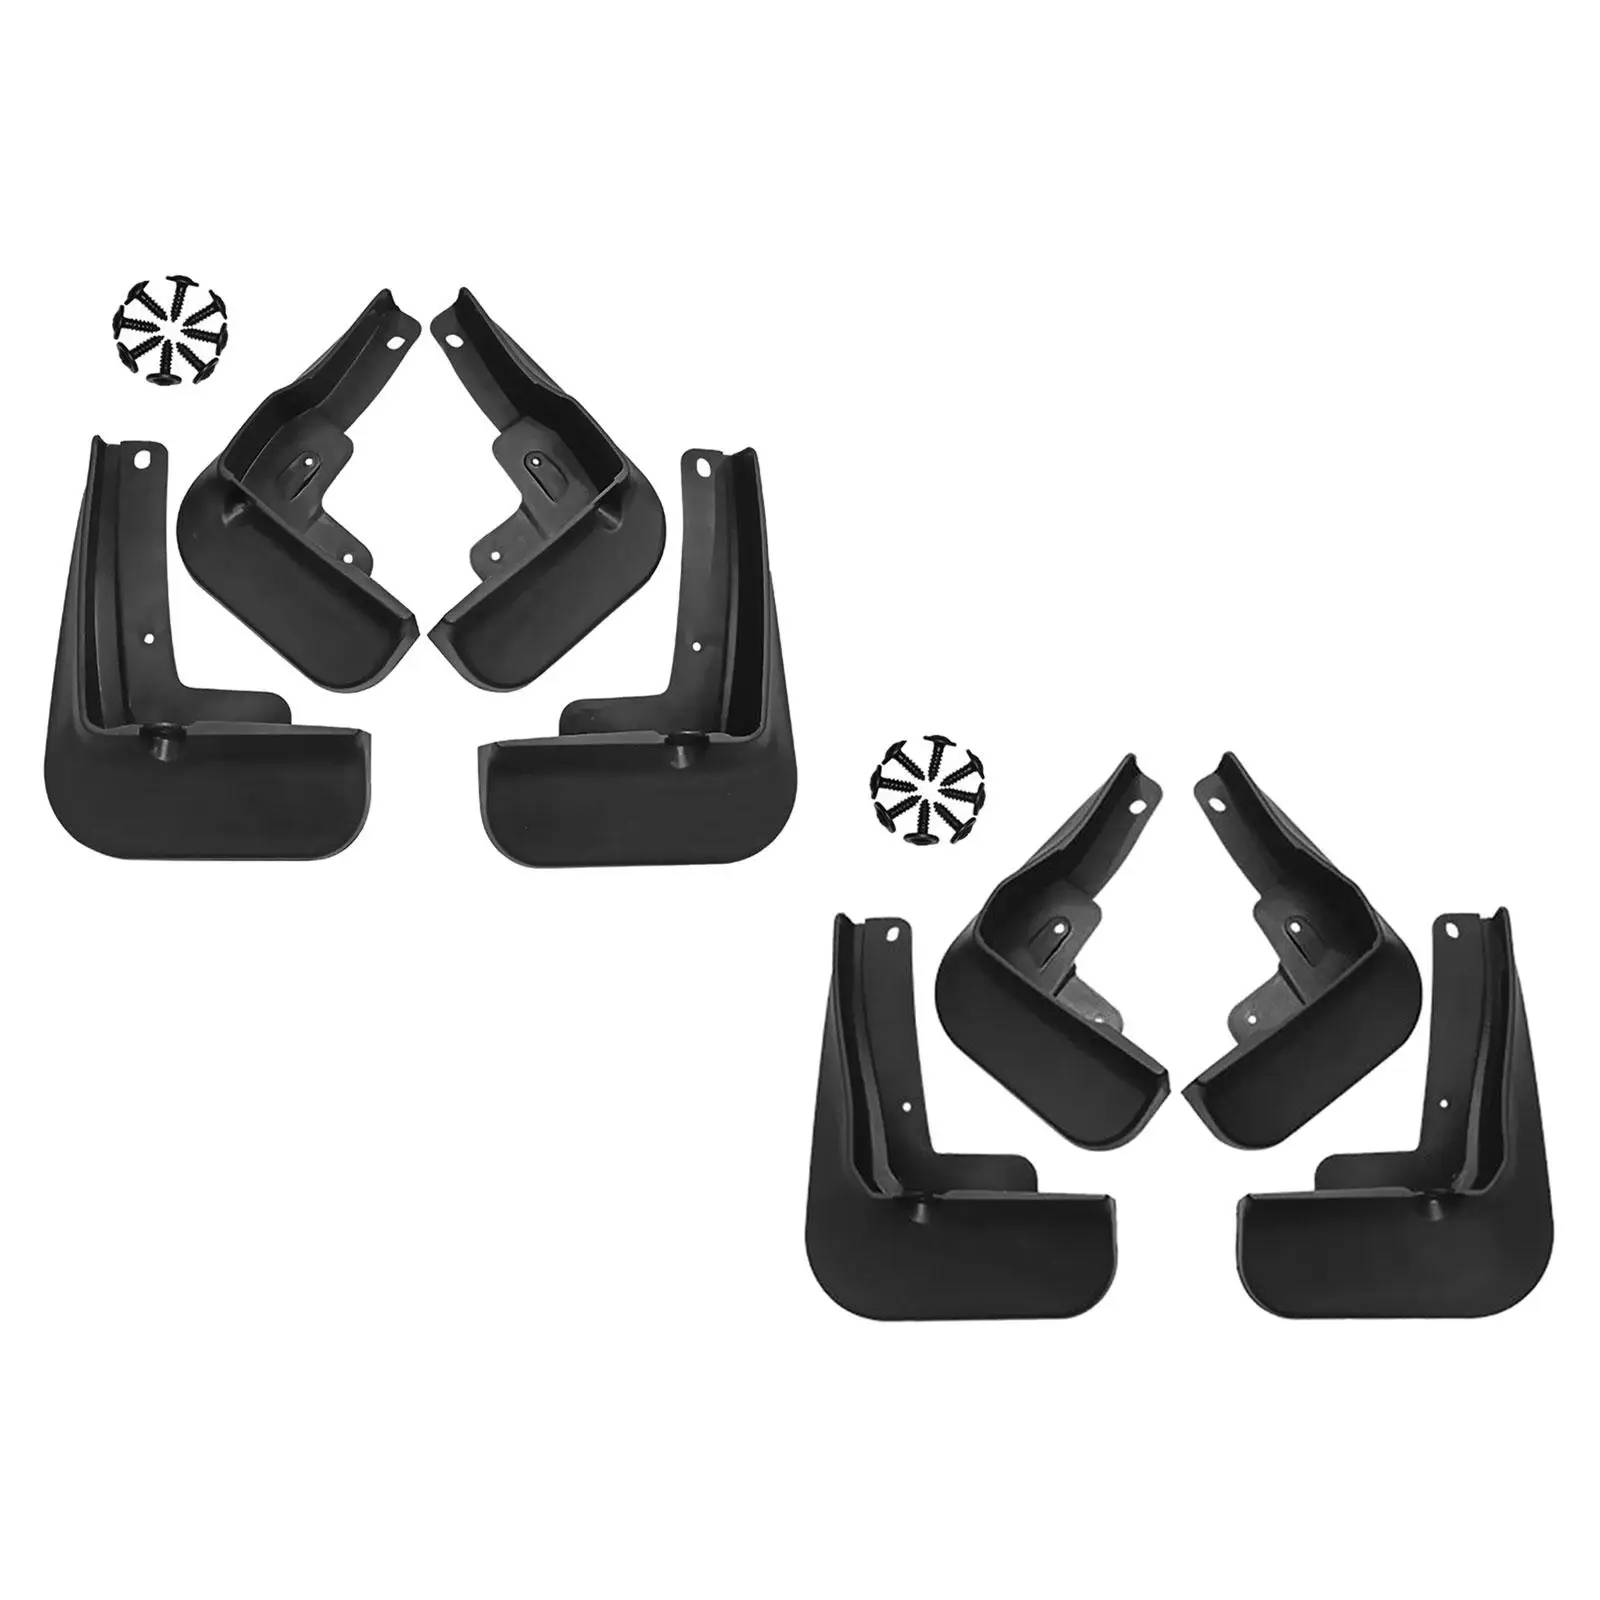 4 Pieces Car Wheel Mud Flaps Mudguard Automotive Fender for Toyota for camry 2018 to 2021 Auto Accessories Easily to Install